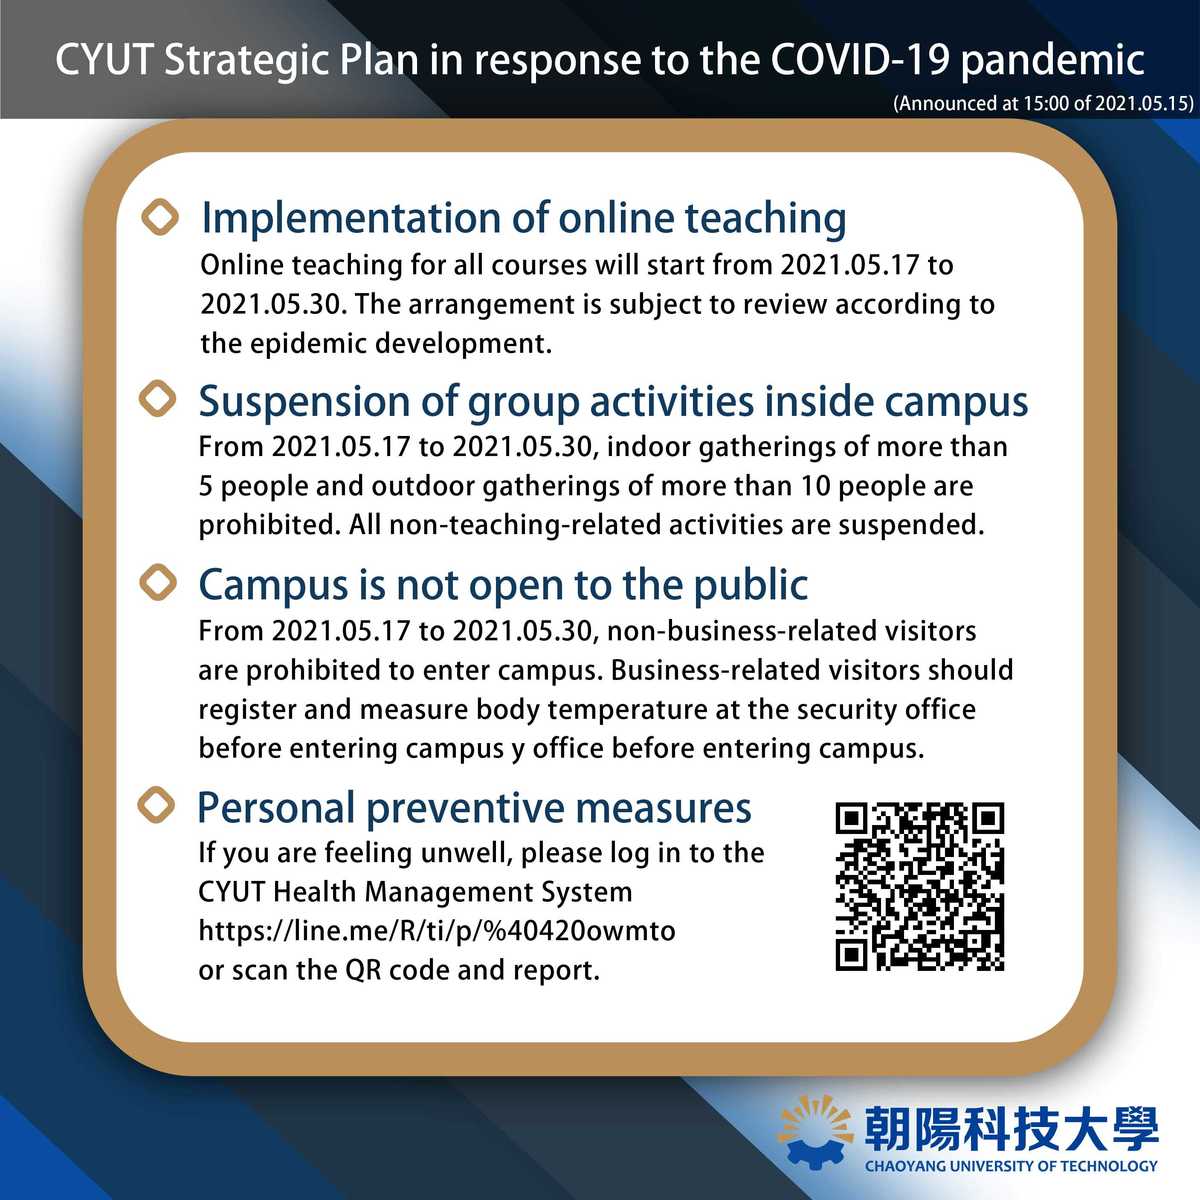 CYUT Strategic Plan in response to the COVID-19 pandemic (Announced at 15:00 of 2021.05.15)